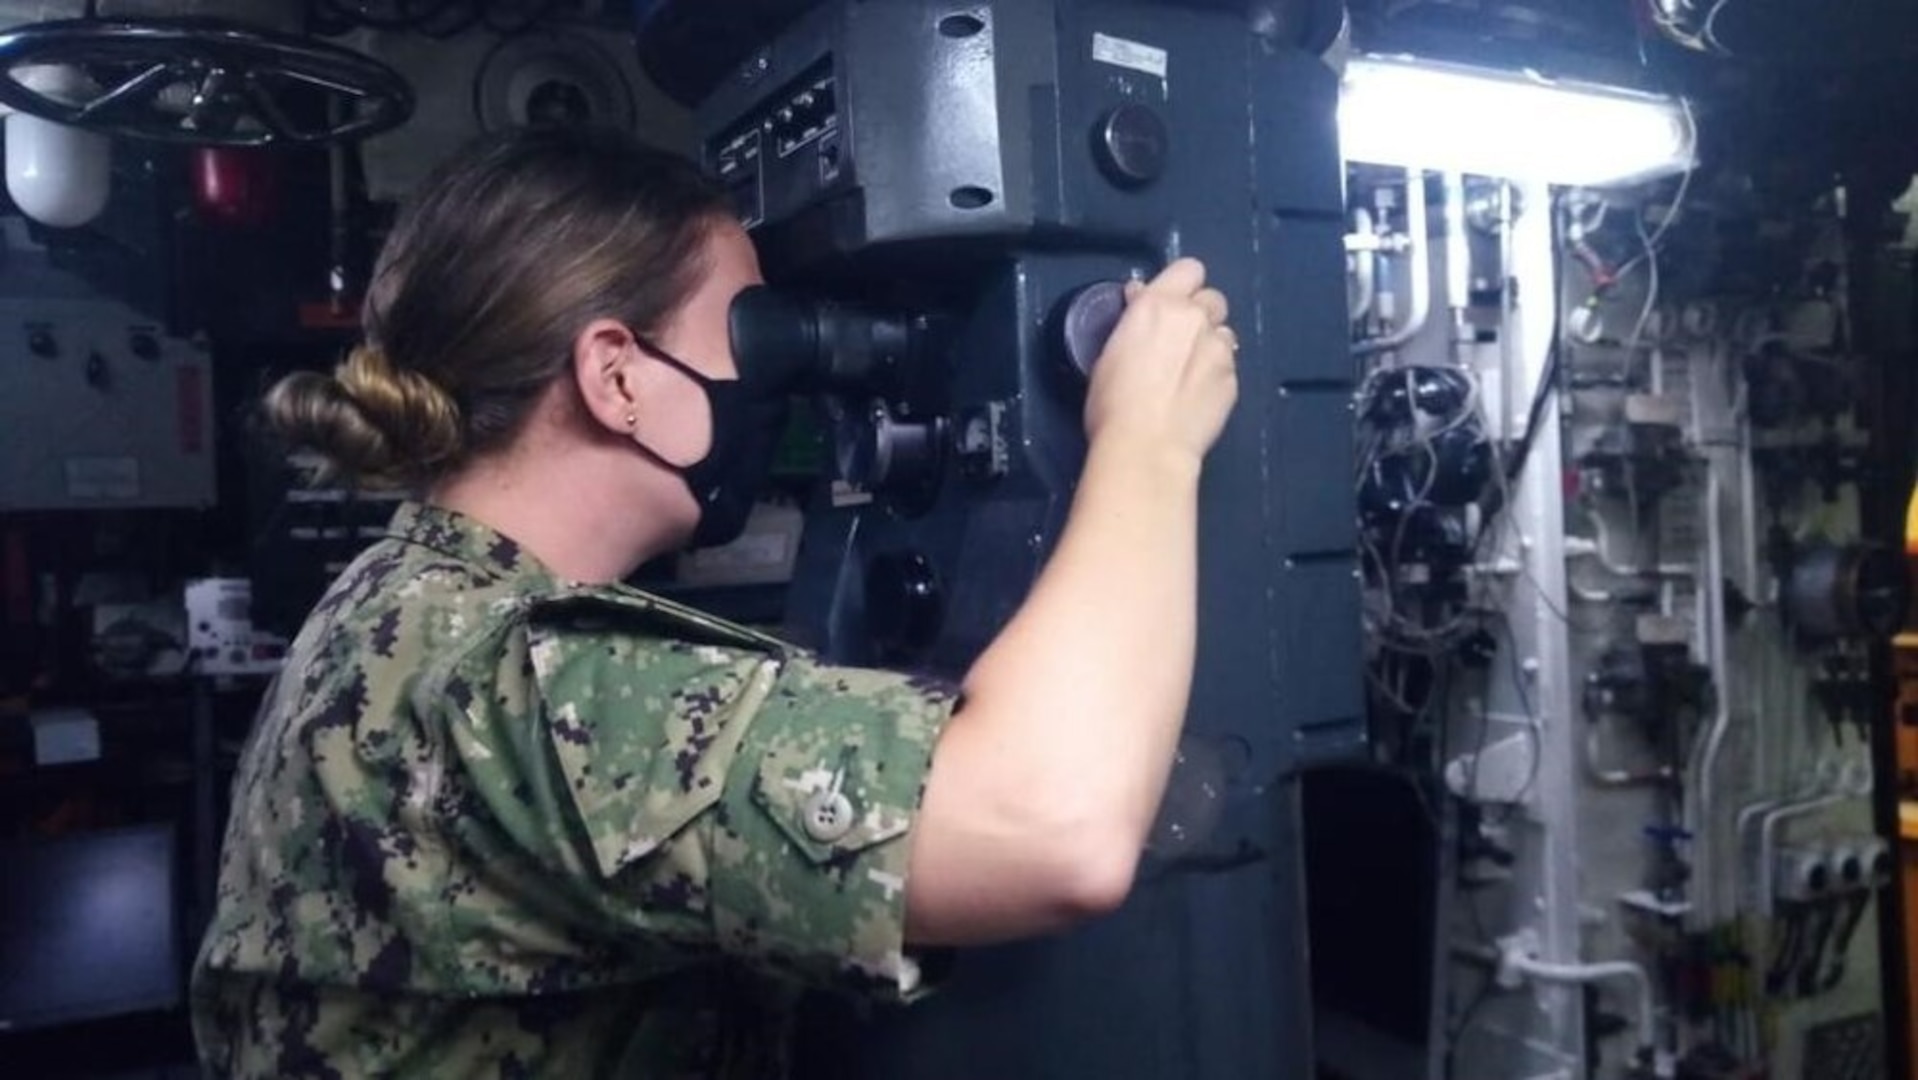 Lt. Taylor Butler, an Olmsted Scholar currently pursuing a Master’s degree in Brazil, uses a stadometer to estimate range with the attack periscope aboard the Brazilian Navy Submarine BNS Tupi (S30), March 4, 2021. Butler embarked on Tupi for four days at sea to help increase the exchange of knowledge between U.S. and Brazilian submarine forces. U.S. Naval Forces Southern Command/U.S. 4th Fleet supports USSOUTHCOM joint and combined military operations by employing maritime forces in cooperative maritime security operations in order to maintain access, enhance interoperability and build enduring partnerships that foster regional security and promote peace, stability and prosperity in the Caribbean, Central and South American regions. (Courtesy U.S. Navy photo/Released)